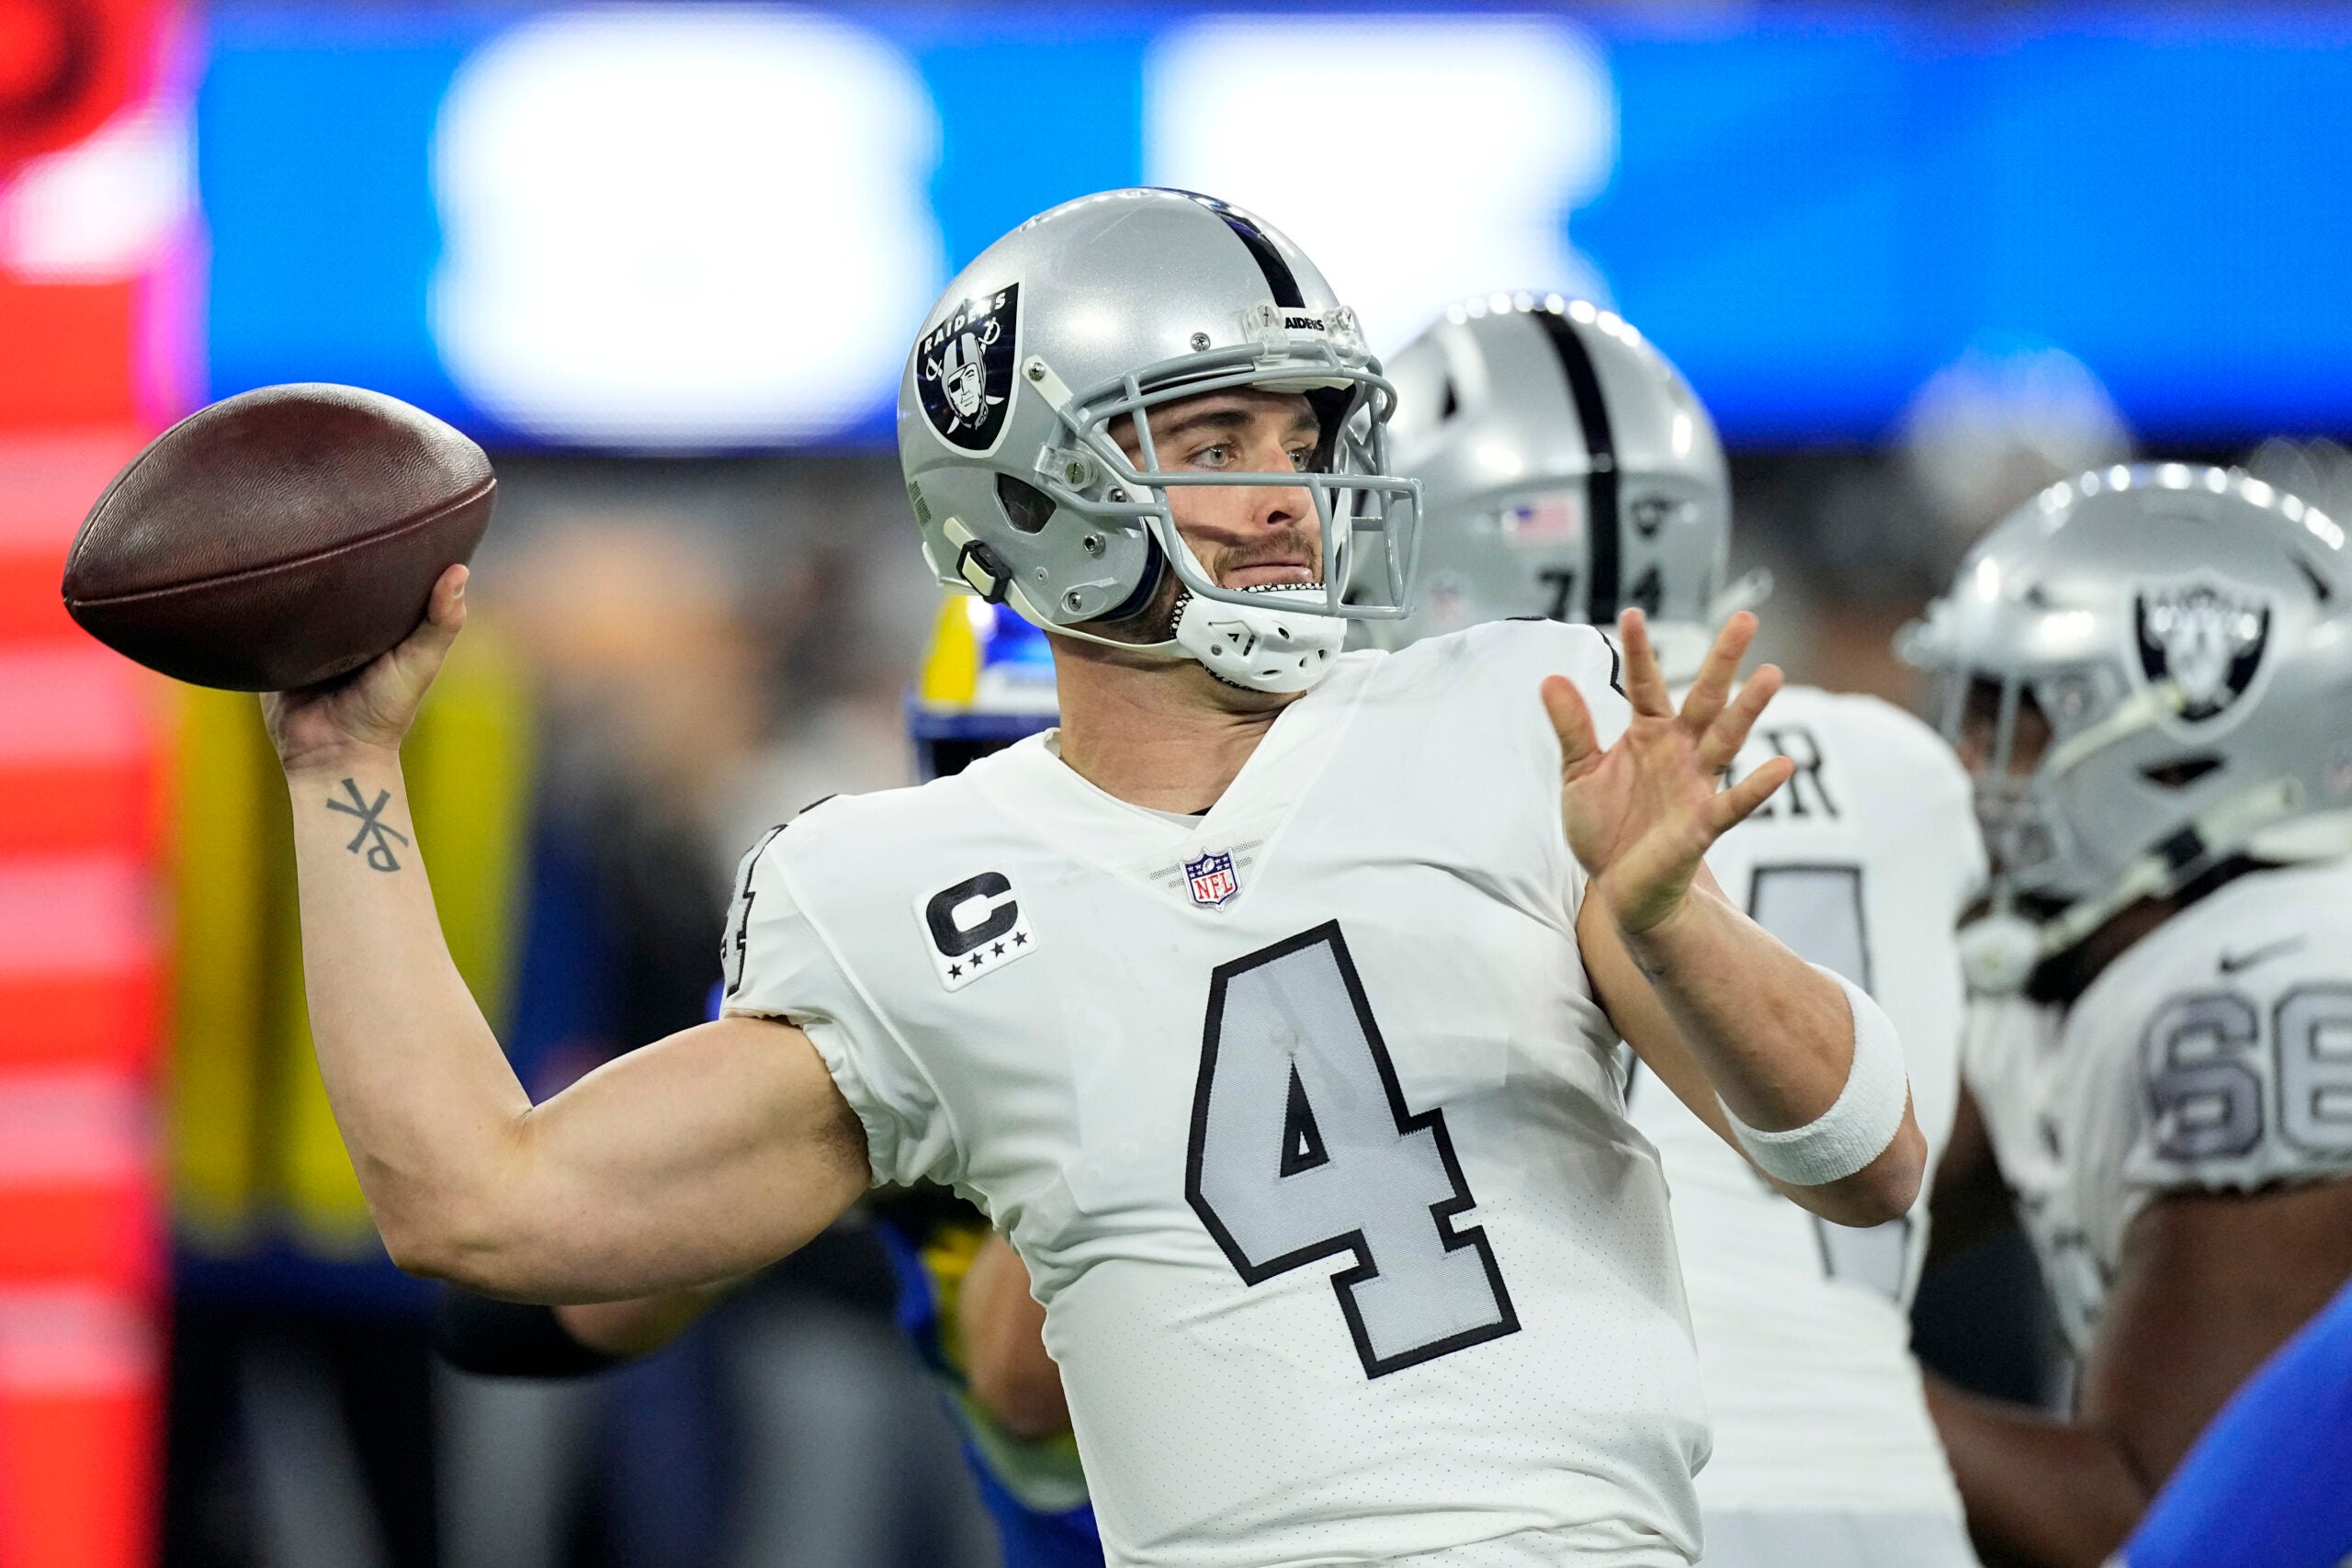 Free agent quarterback Derek Carr throwing a pass for the Raiders.